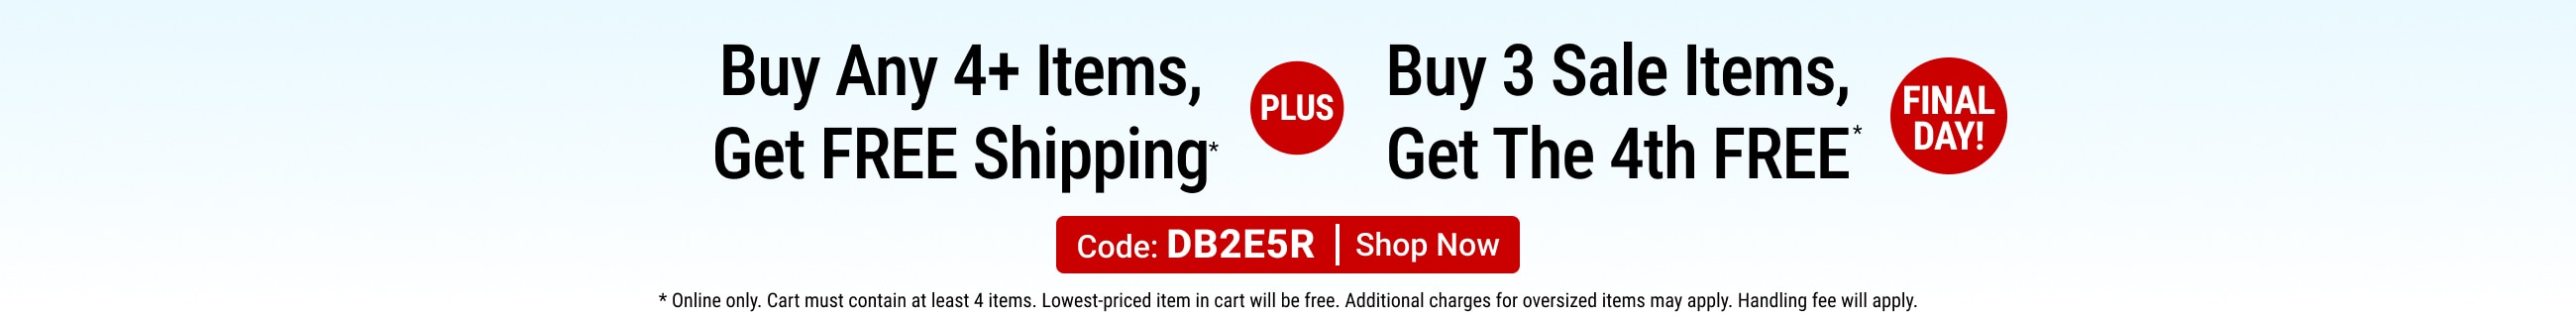 Buy any 4+ items, get free shipping - shop now